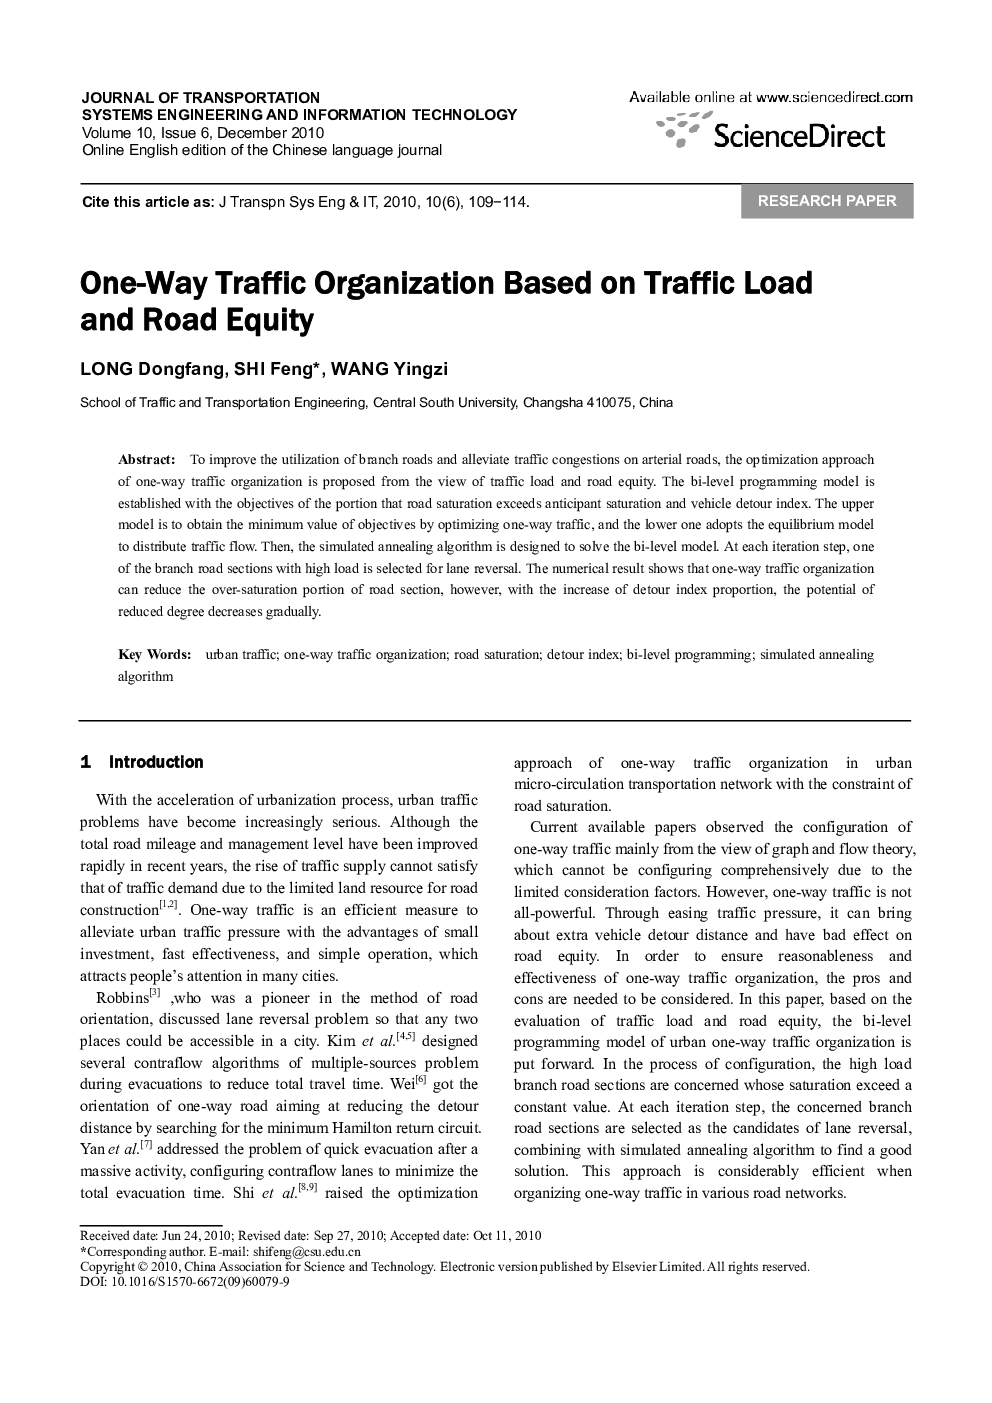 One-Way Traffic Organization Based on Traffic Load and Road Equity